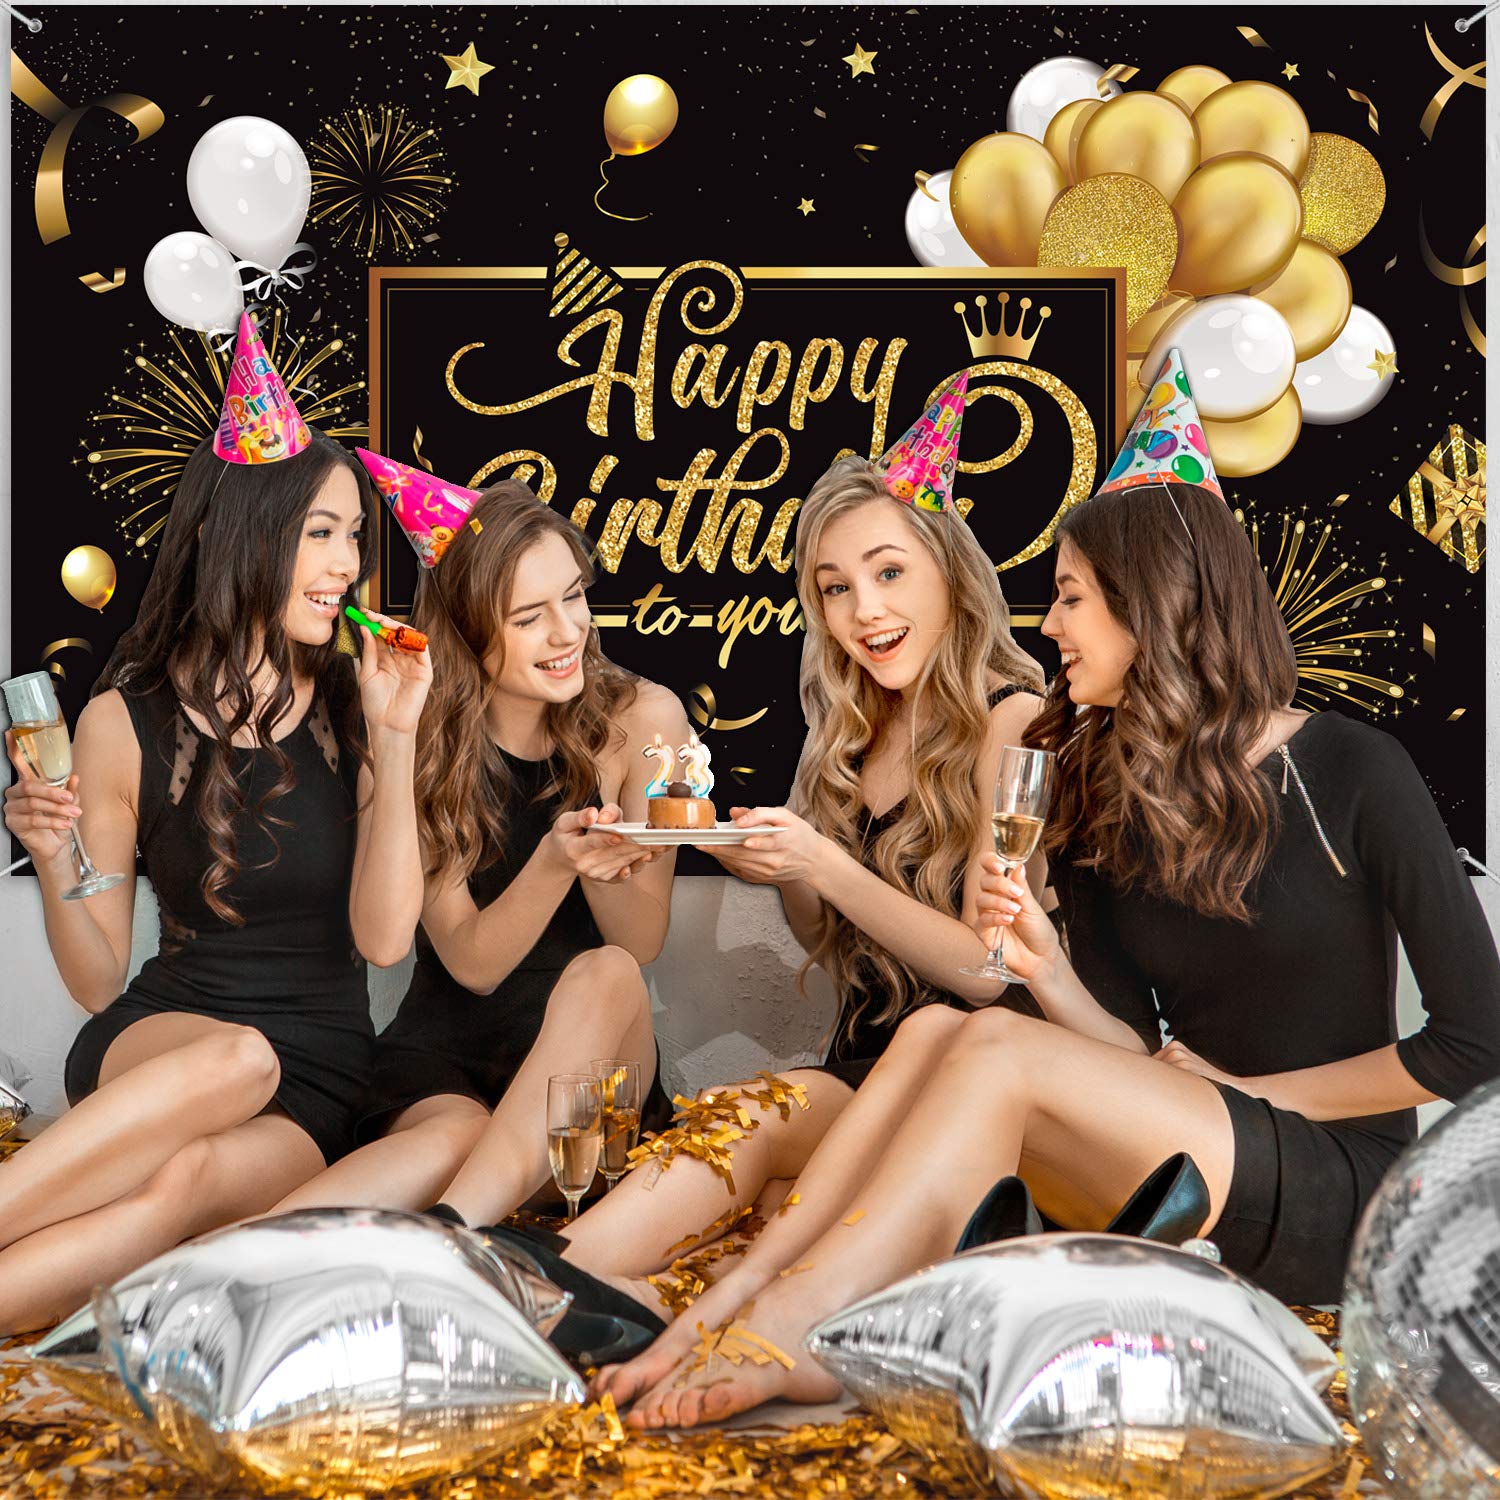 Happy Birthday Backdrop Banner Large Black Gold Balloon Star Fireworks Party Sign Poster Photo Booth Backdrop for Men Women 30th 40th 50th 60th 70th 80th Birthday Party Decorations, 72.8 x 43.3 Inch